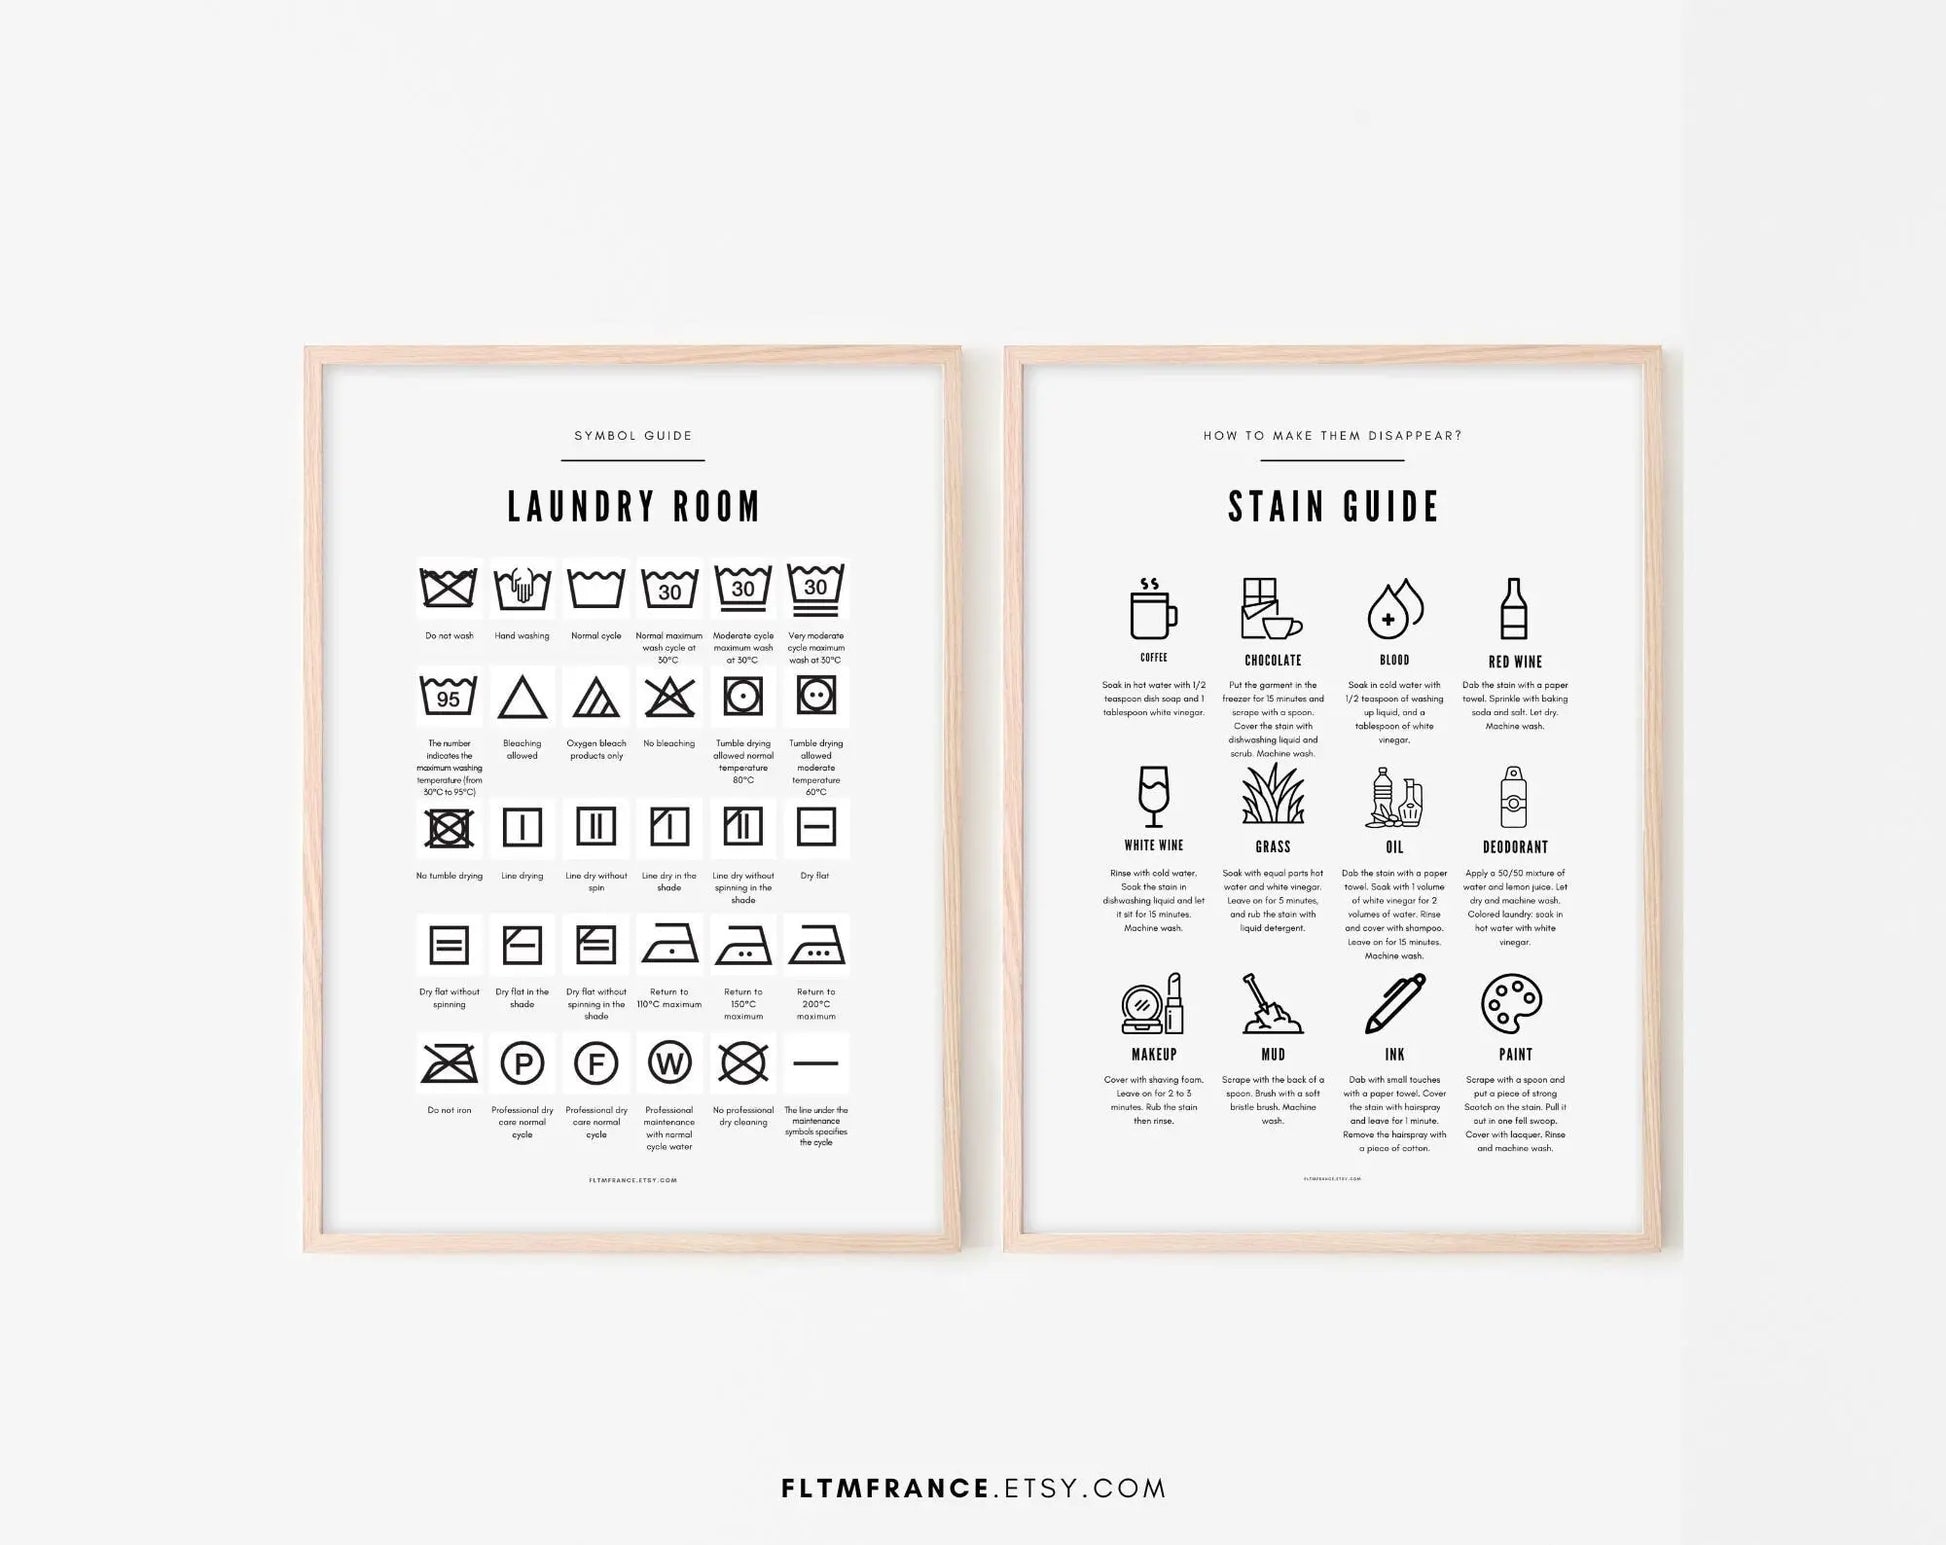 Set of 2 Posters Laundry Room and Stain Guide - Laundry Symbols Guide Poster - Wall art printable poster - Laundry Wall Decor FLTMfrance